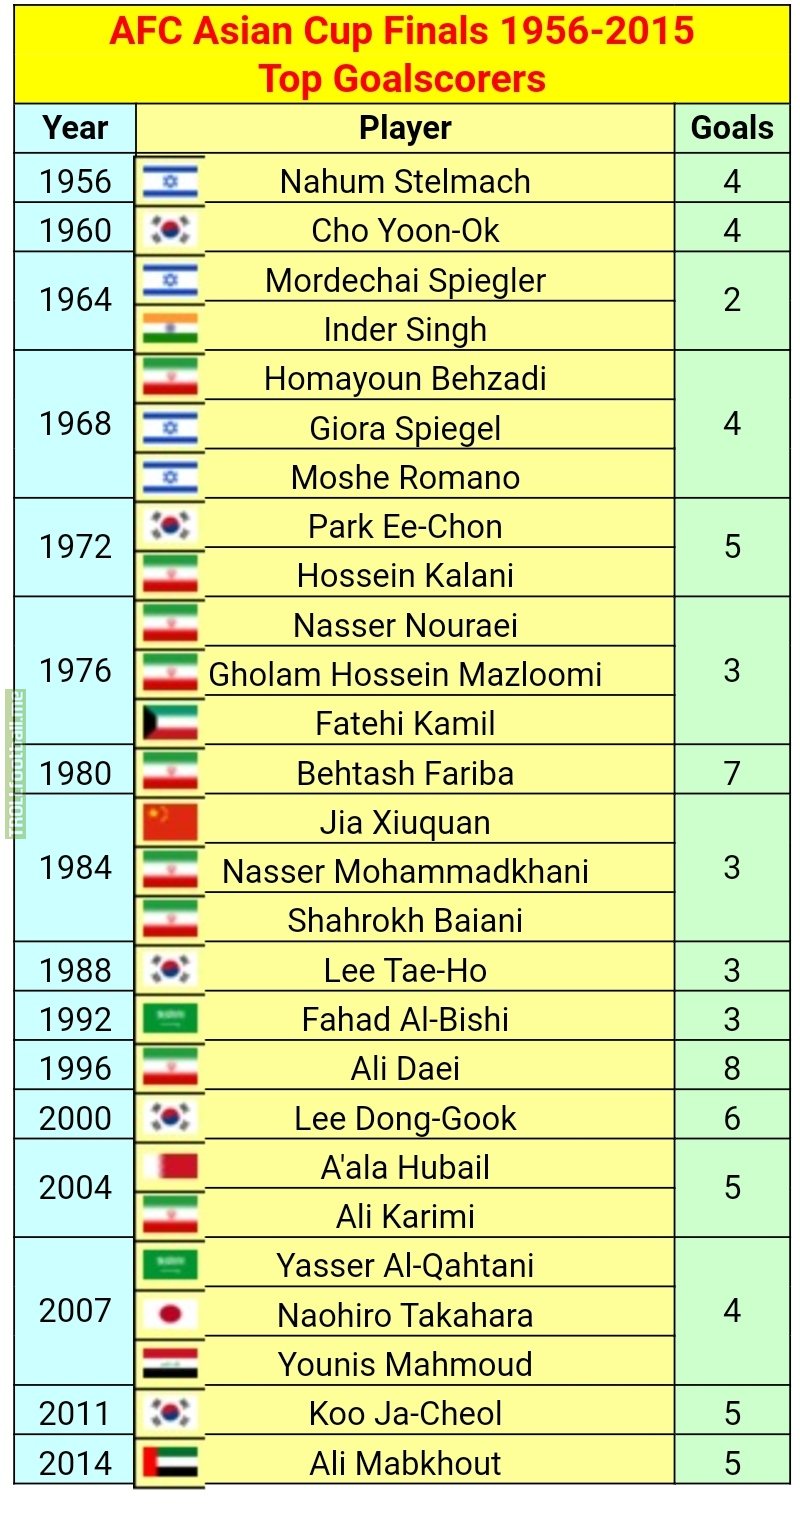 AFC Asian Cup top goalscorers from 1956-2015